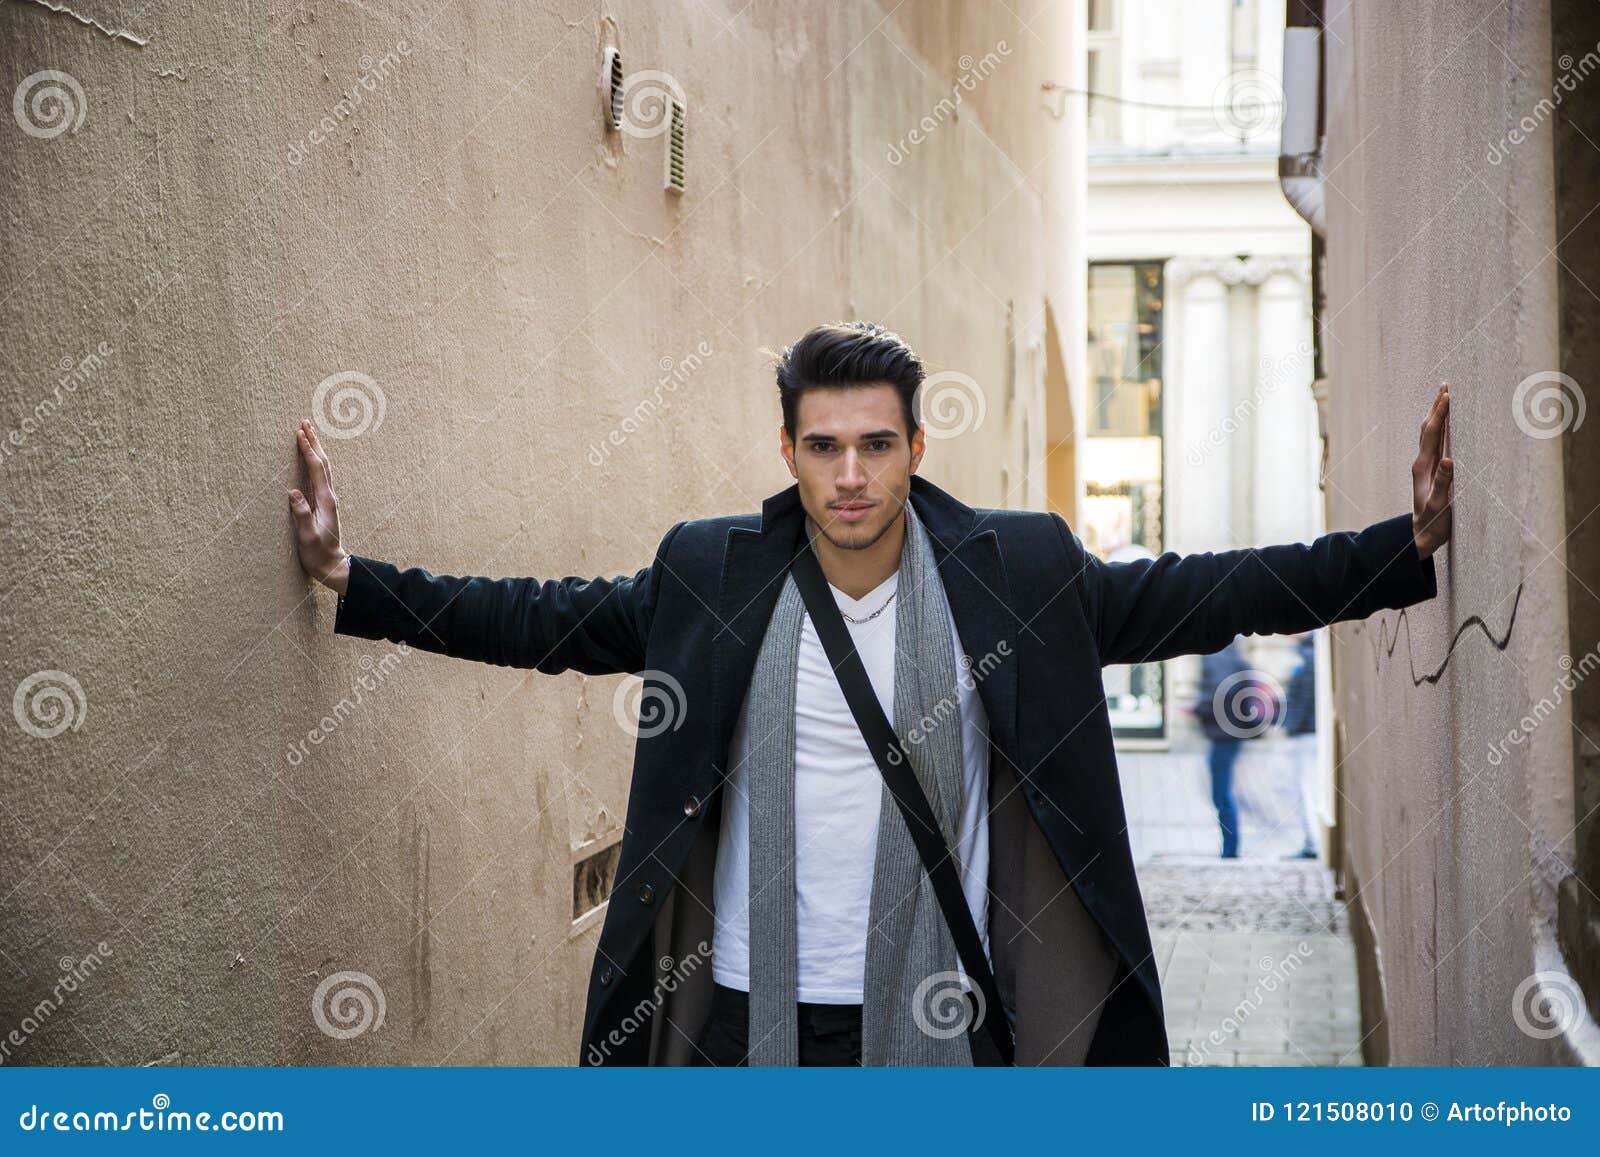 young man pressed between two walls. oppression, anxiety